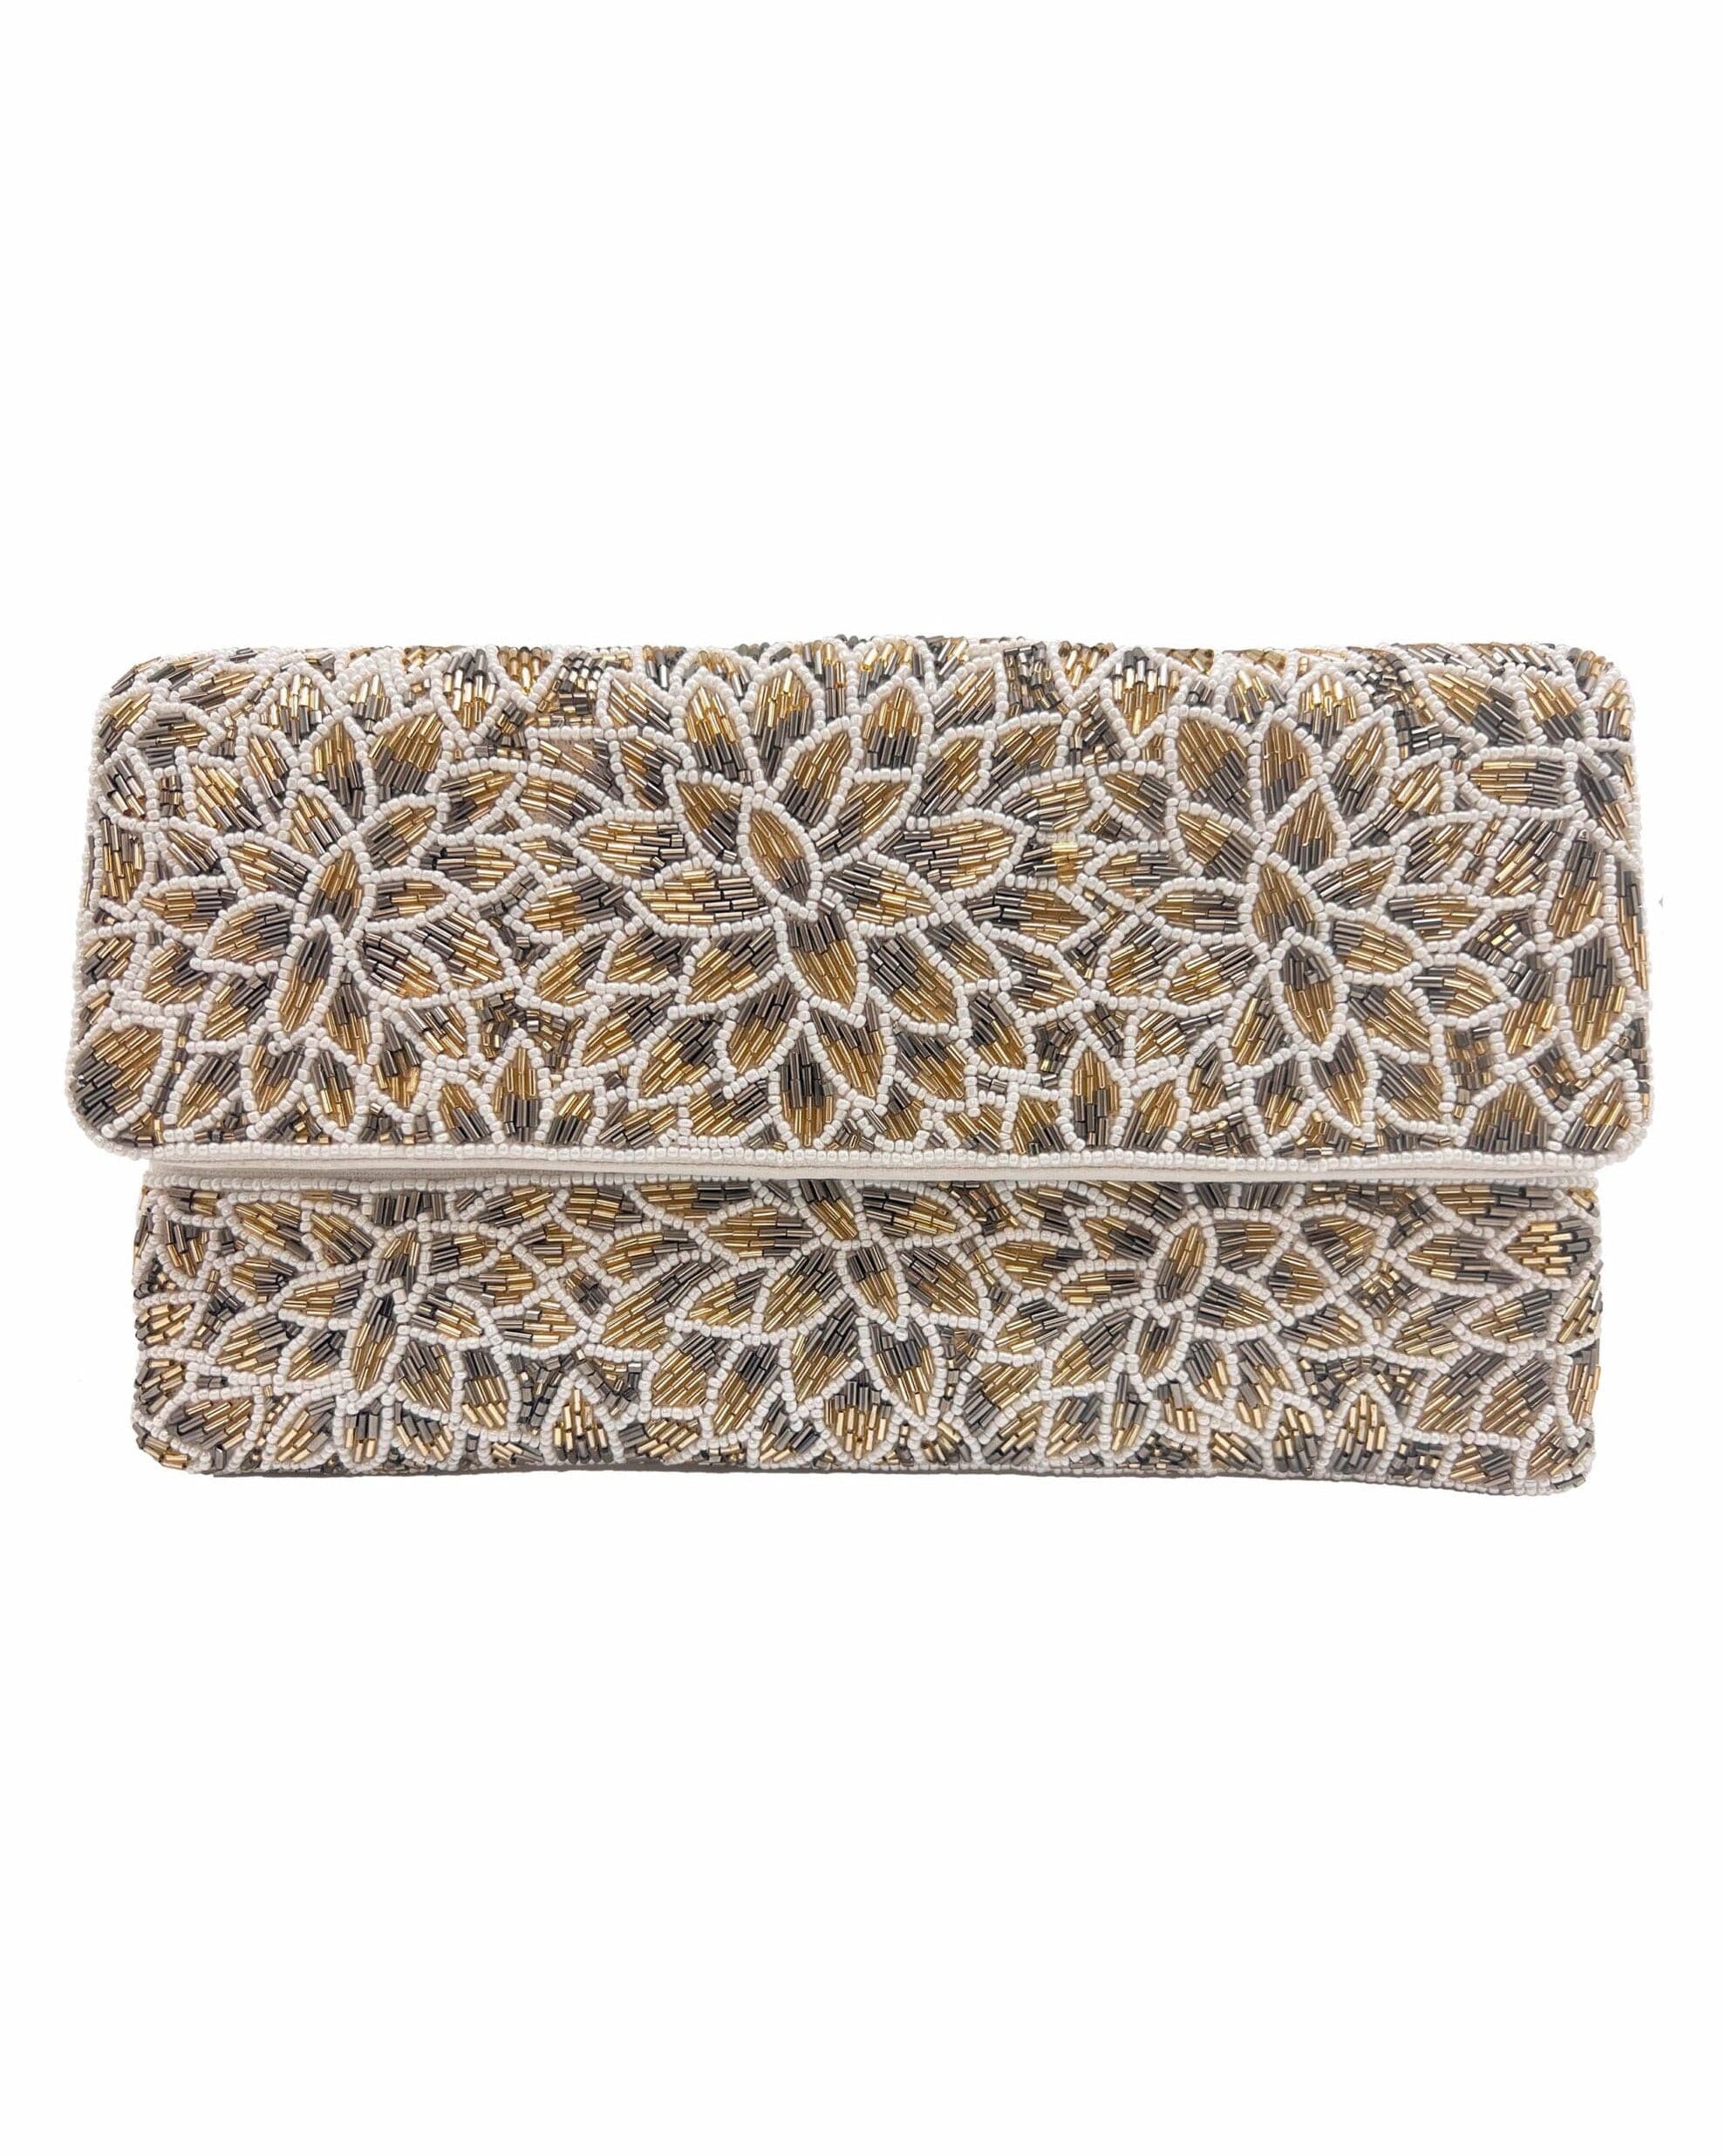 Silver & Gold Flowers Beaded Clutch.